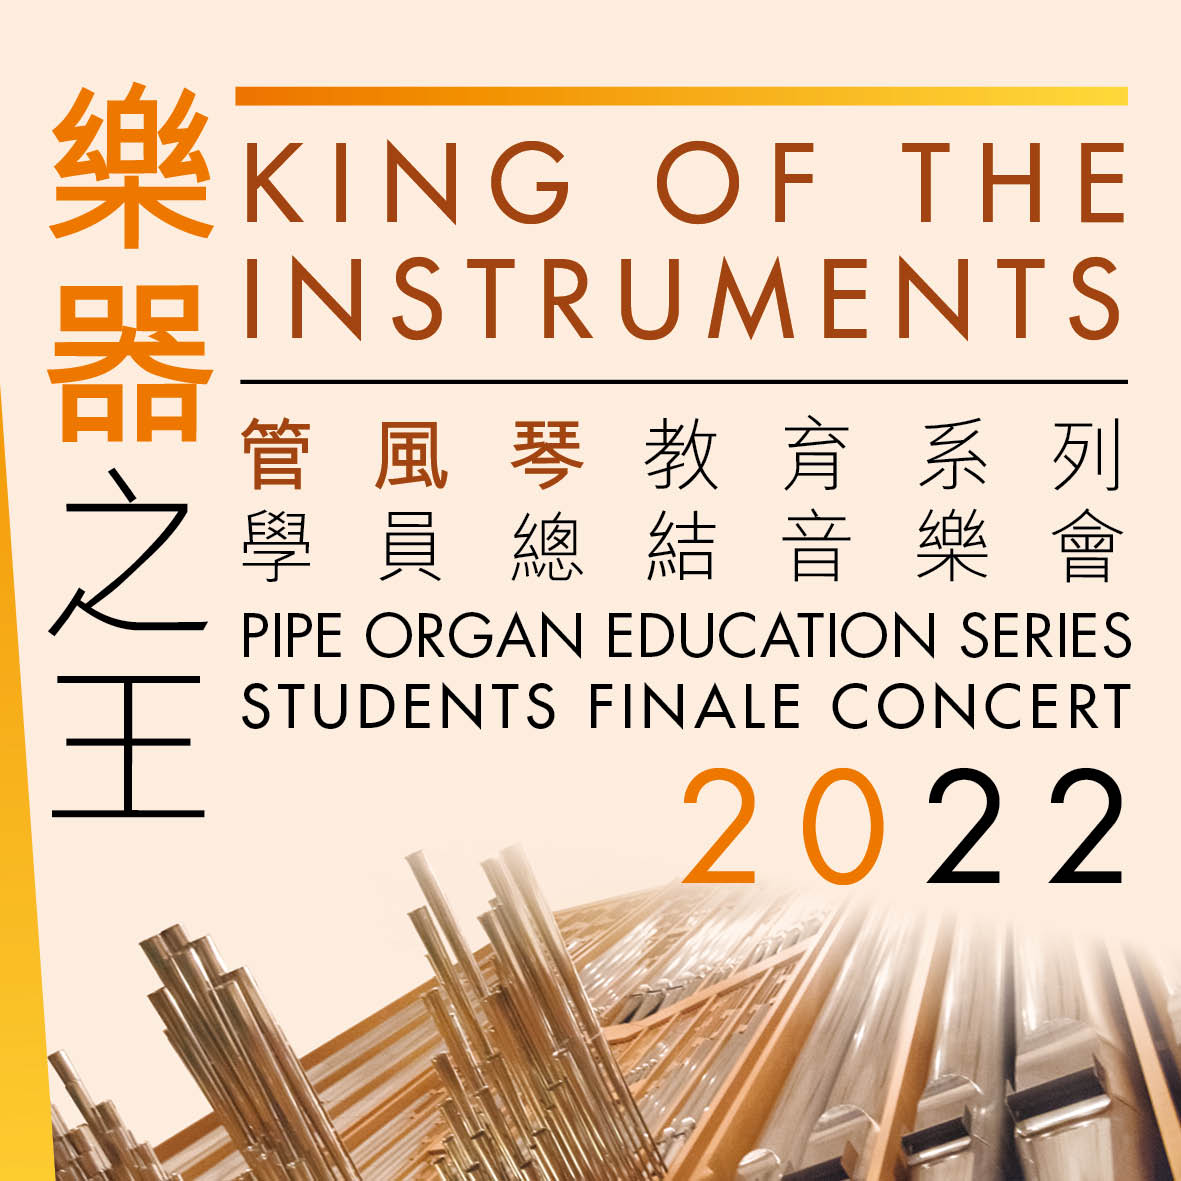 Pipe Organ Education Series 2022 Students Finale Concert